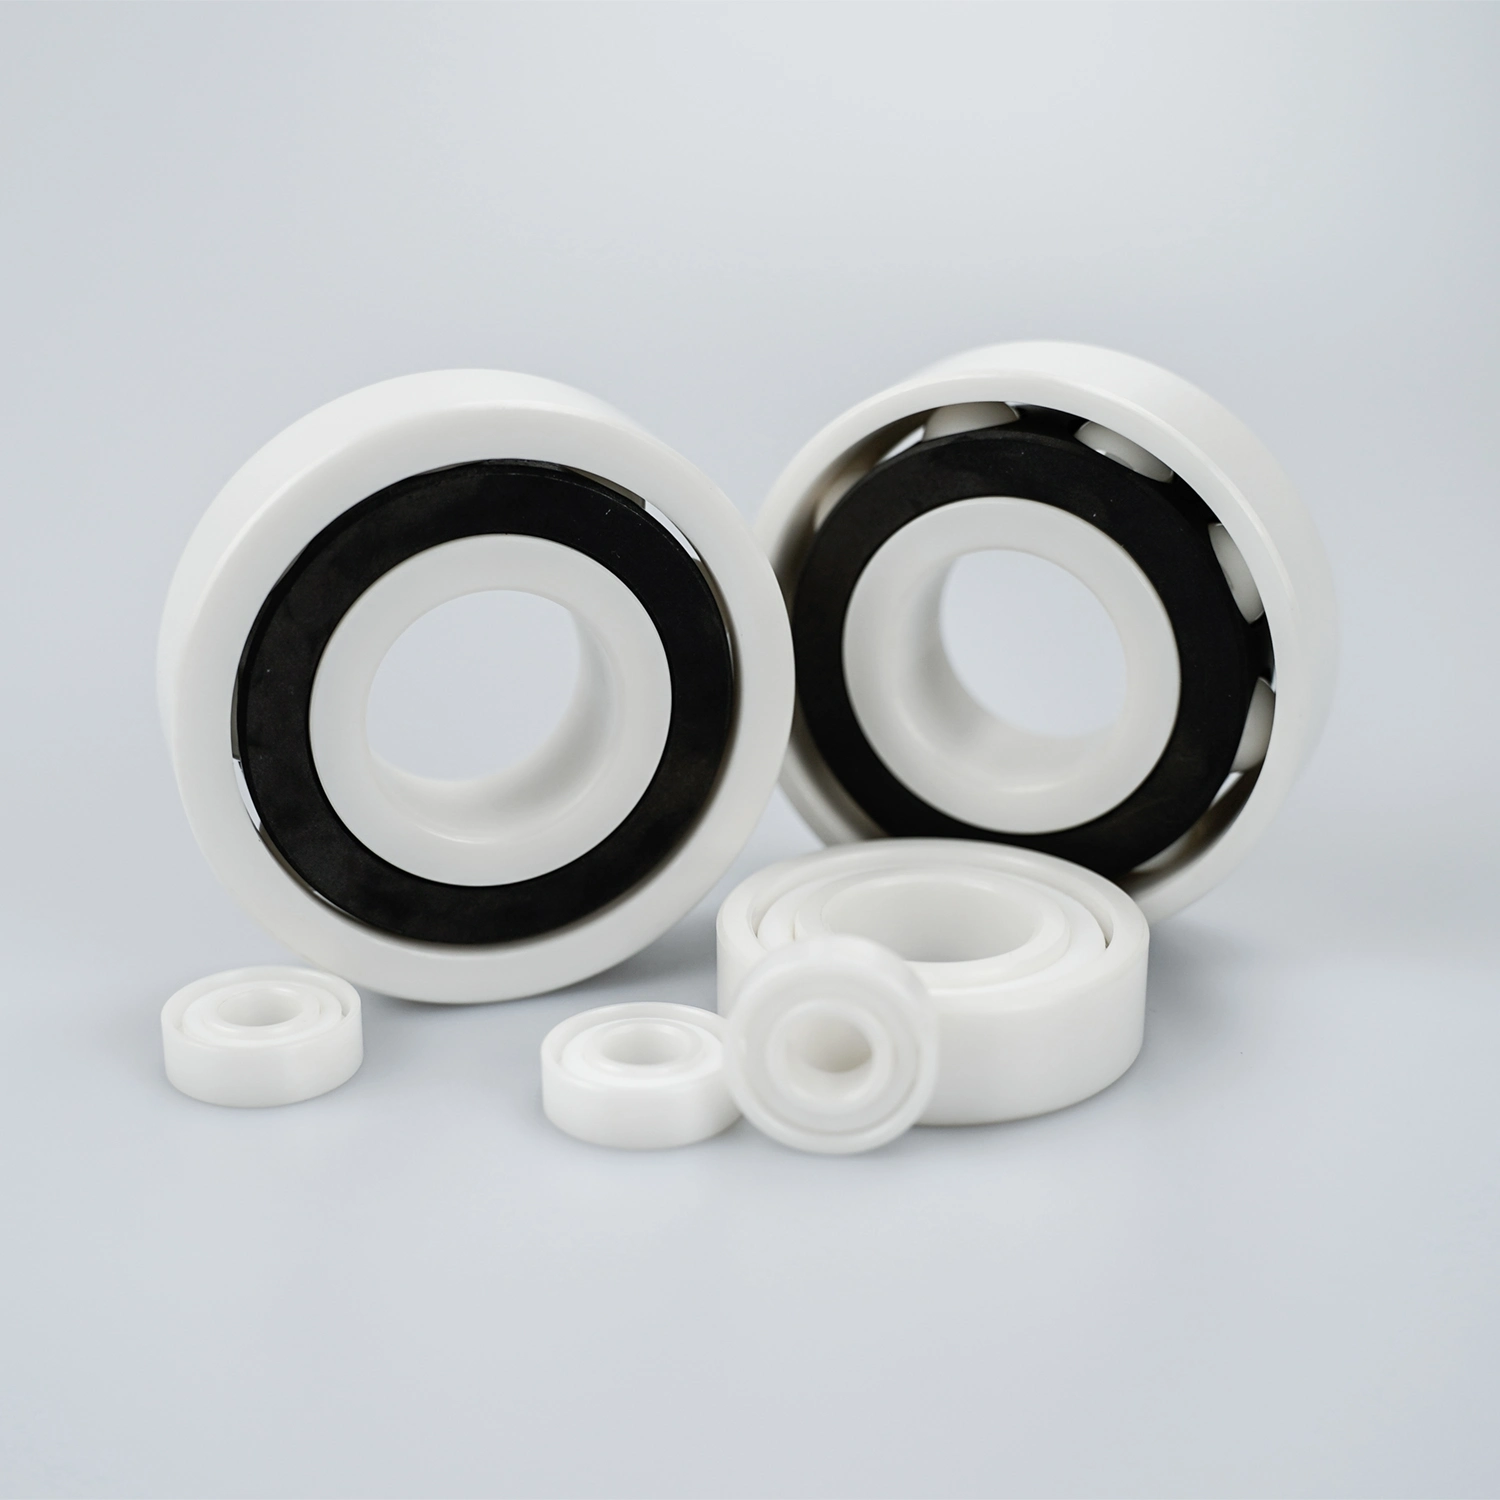 Ceramic Bearings: Advantages and Application Exploration